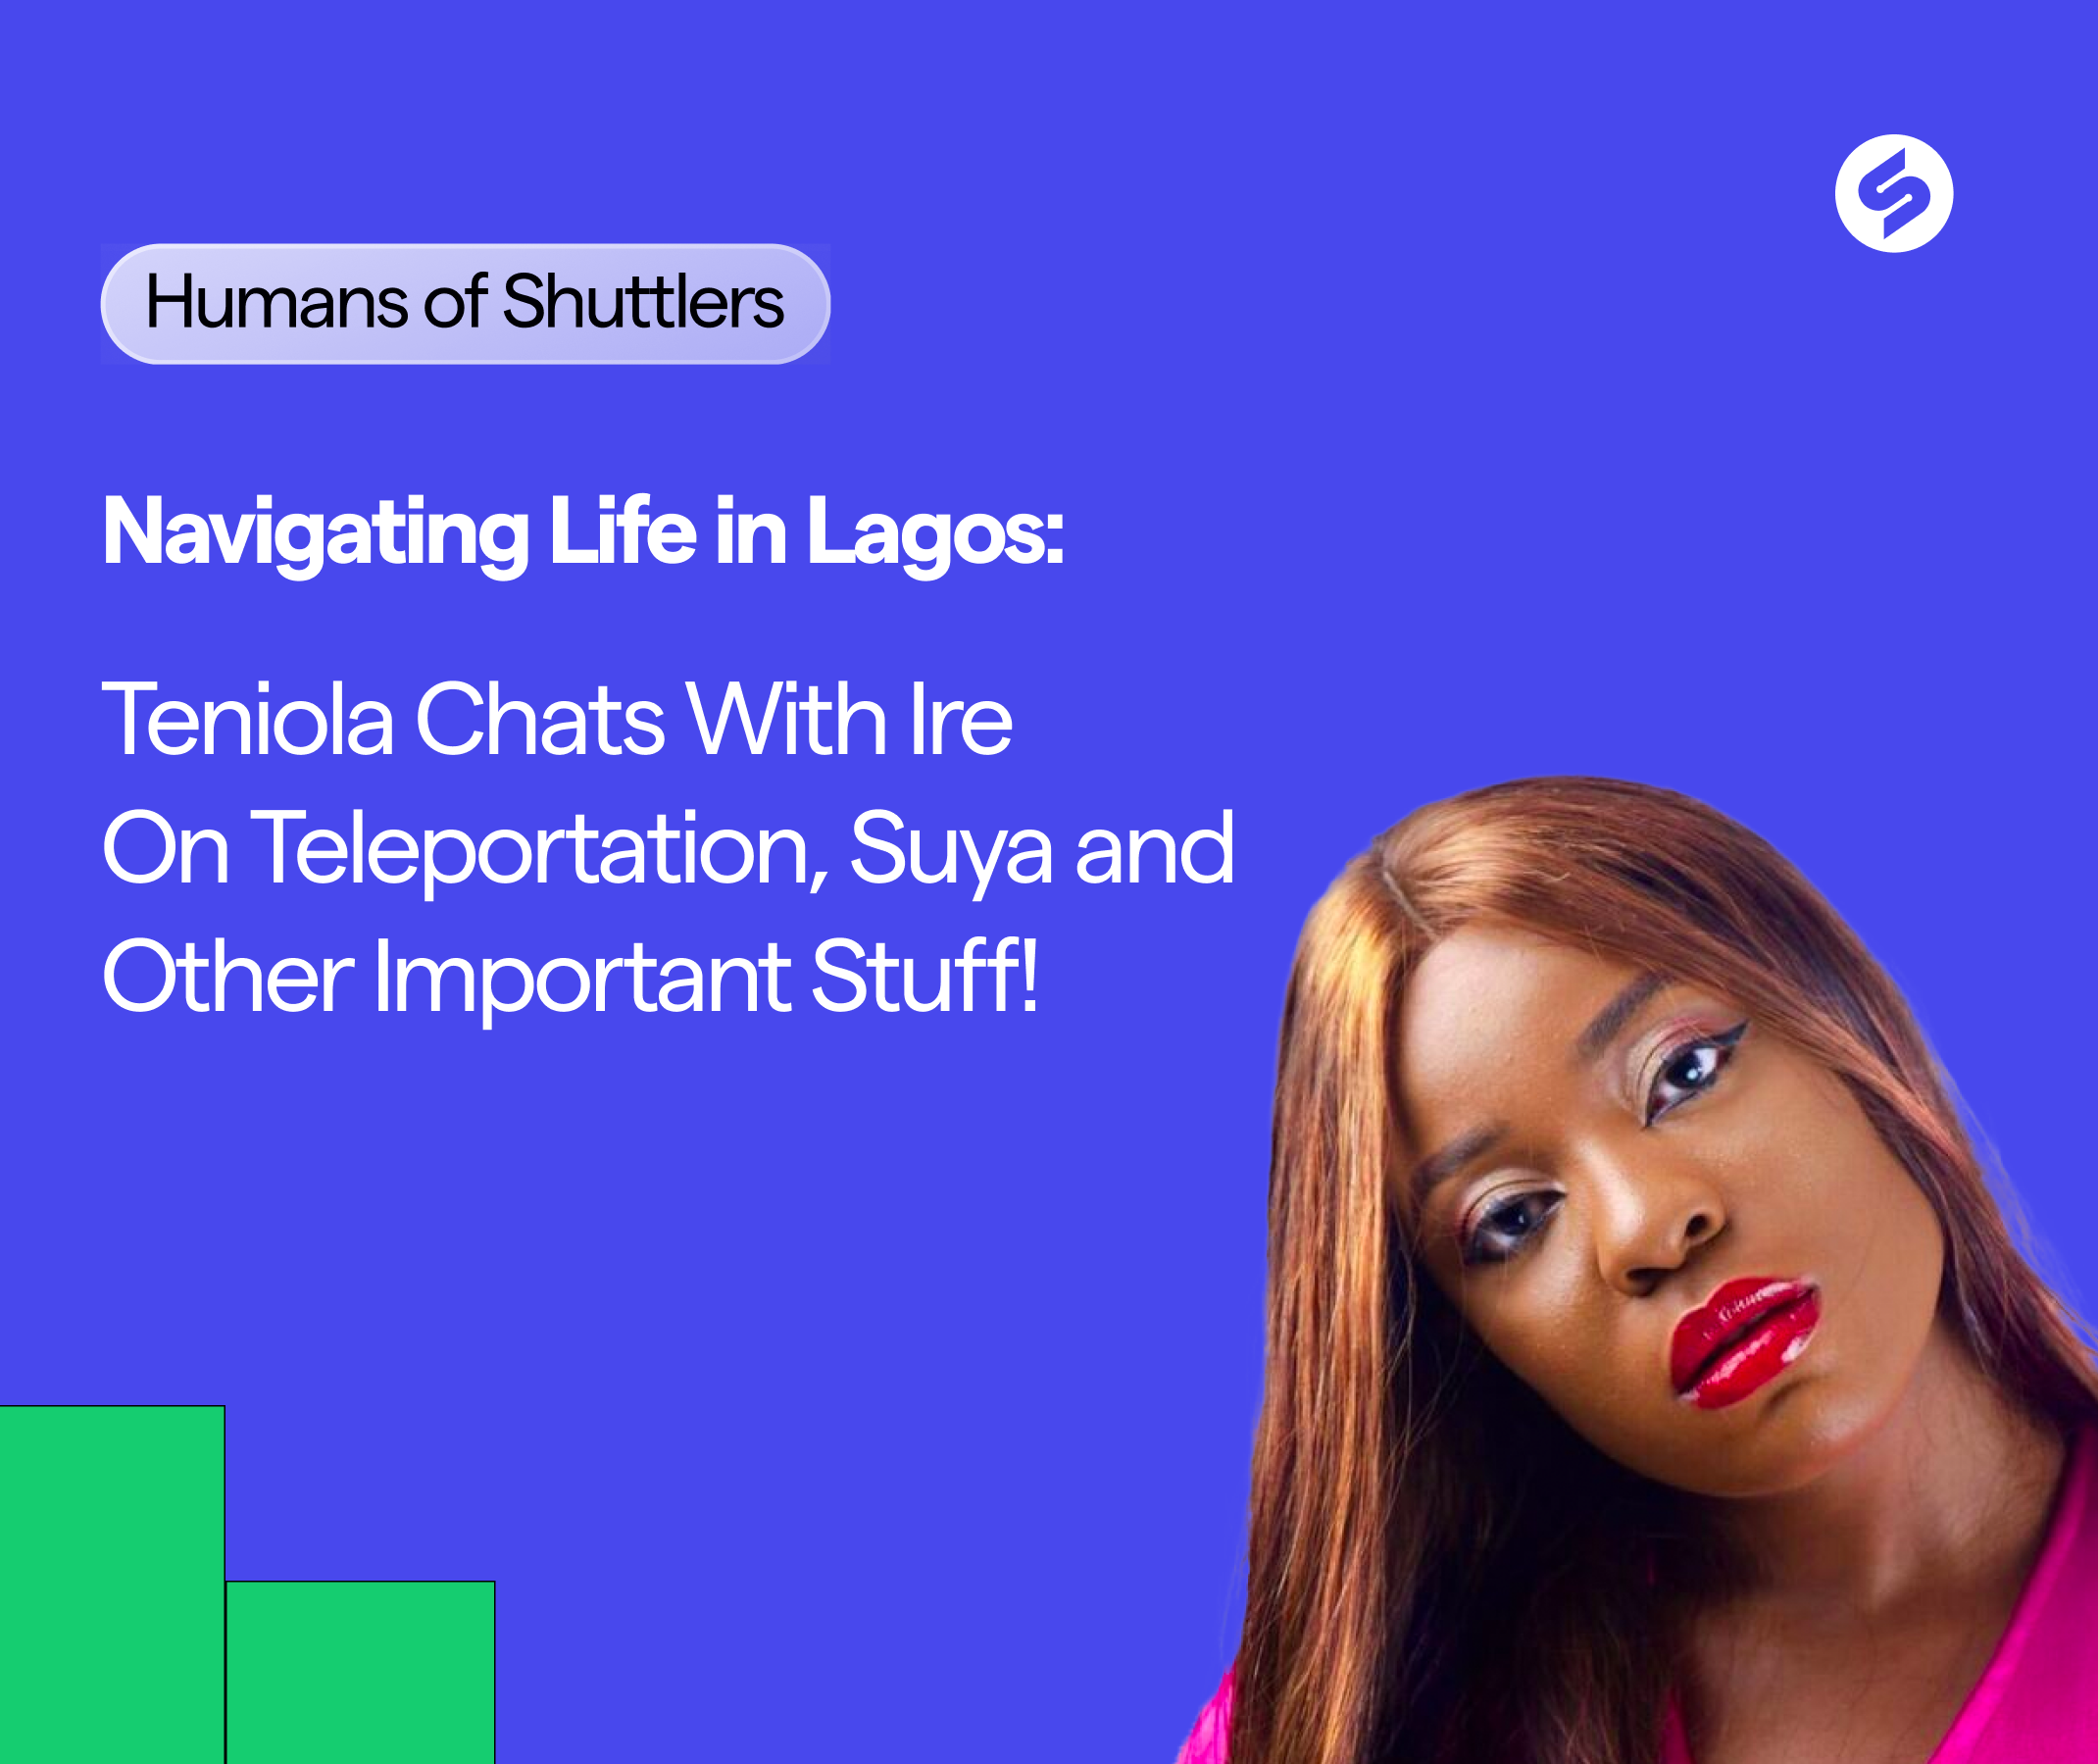 Navigating Life in Lagos: Teniola Chats With Ire On Teleportation, Suya and Other Important Stuff!